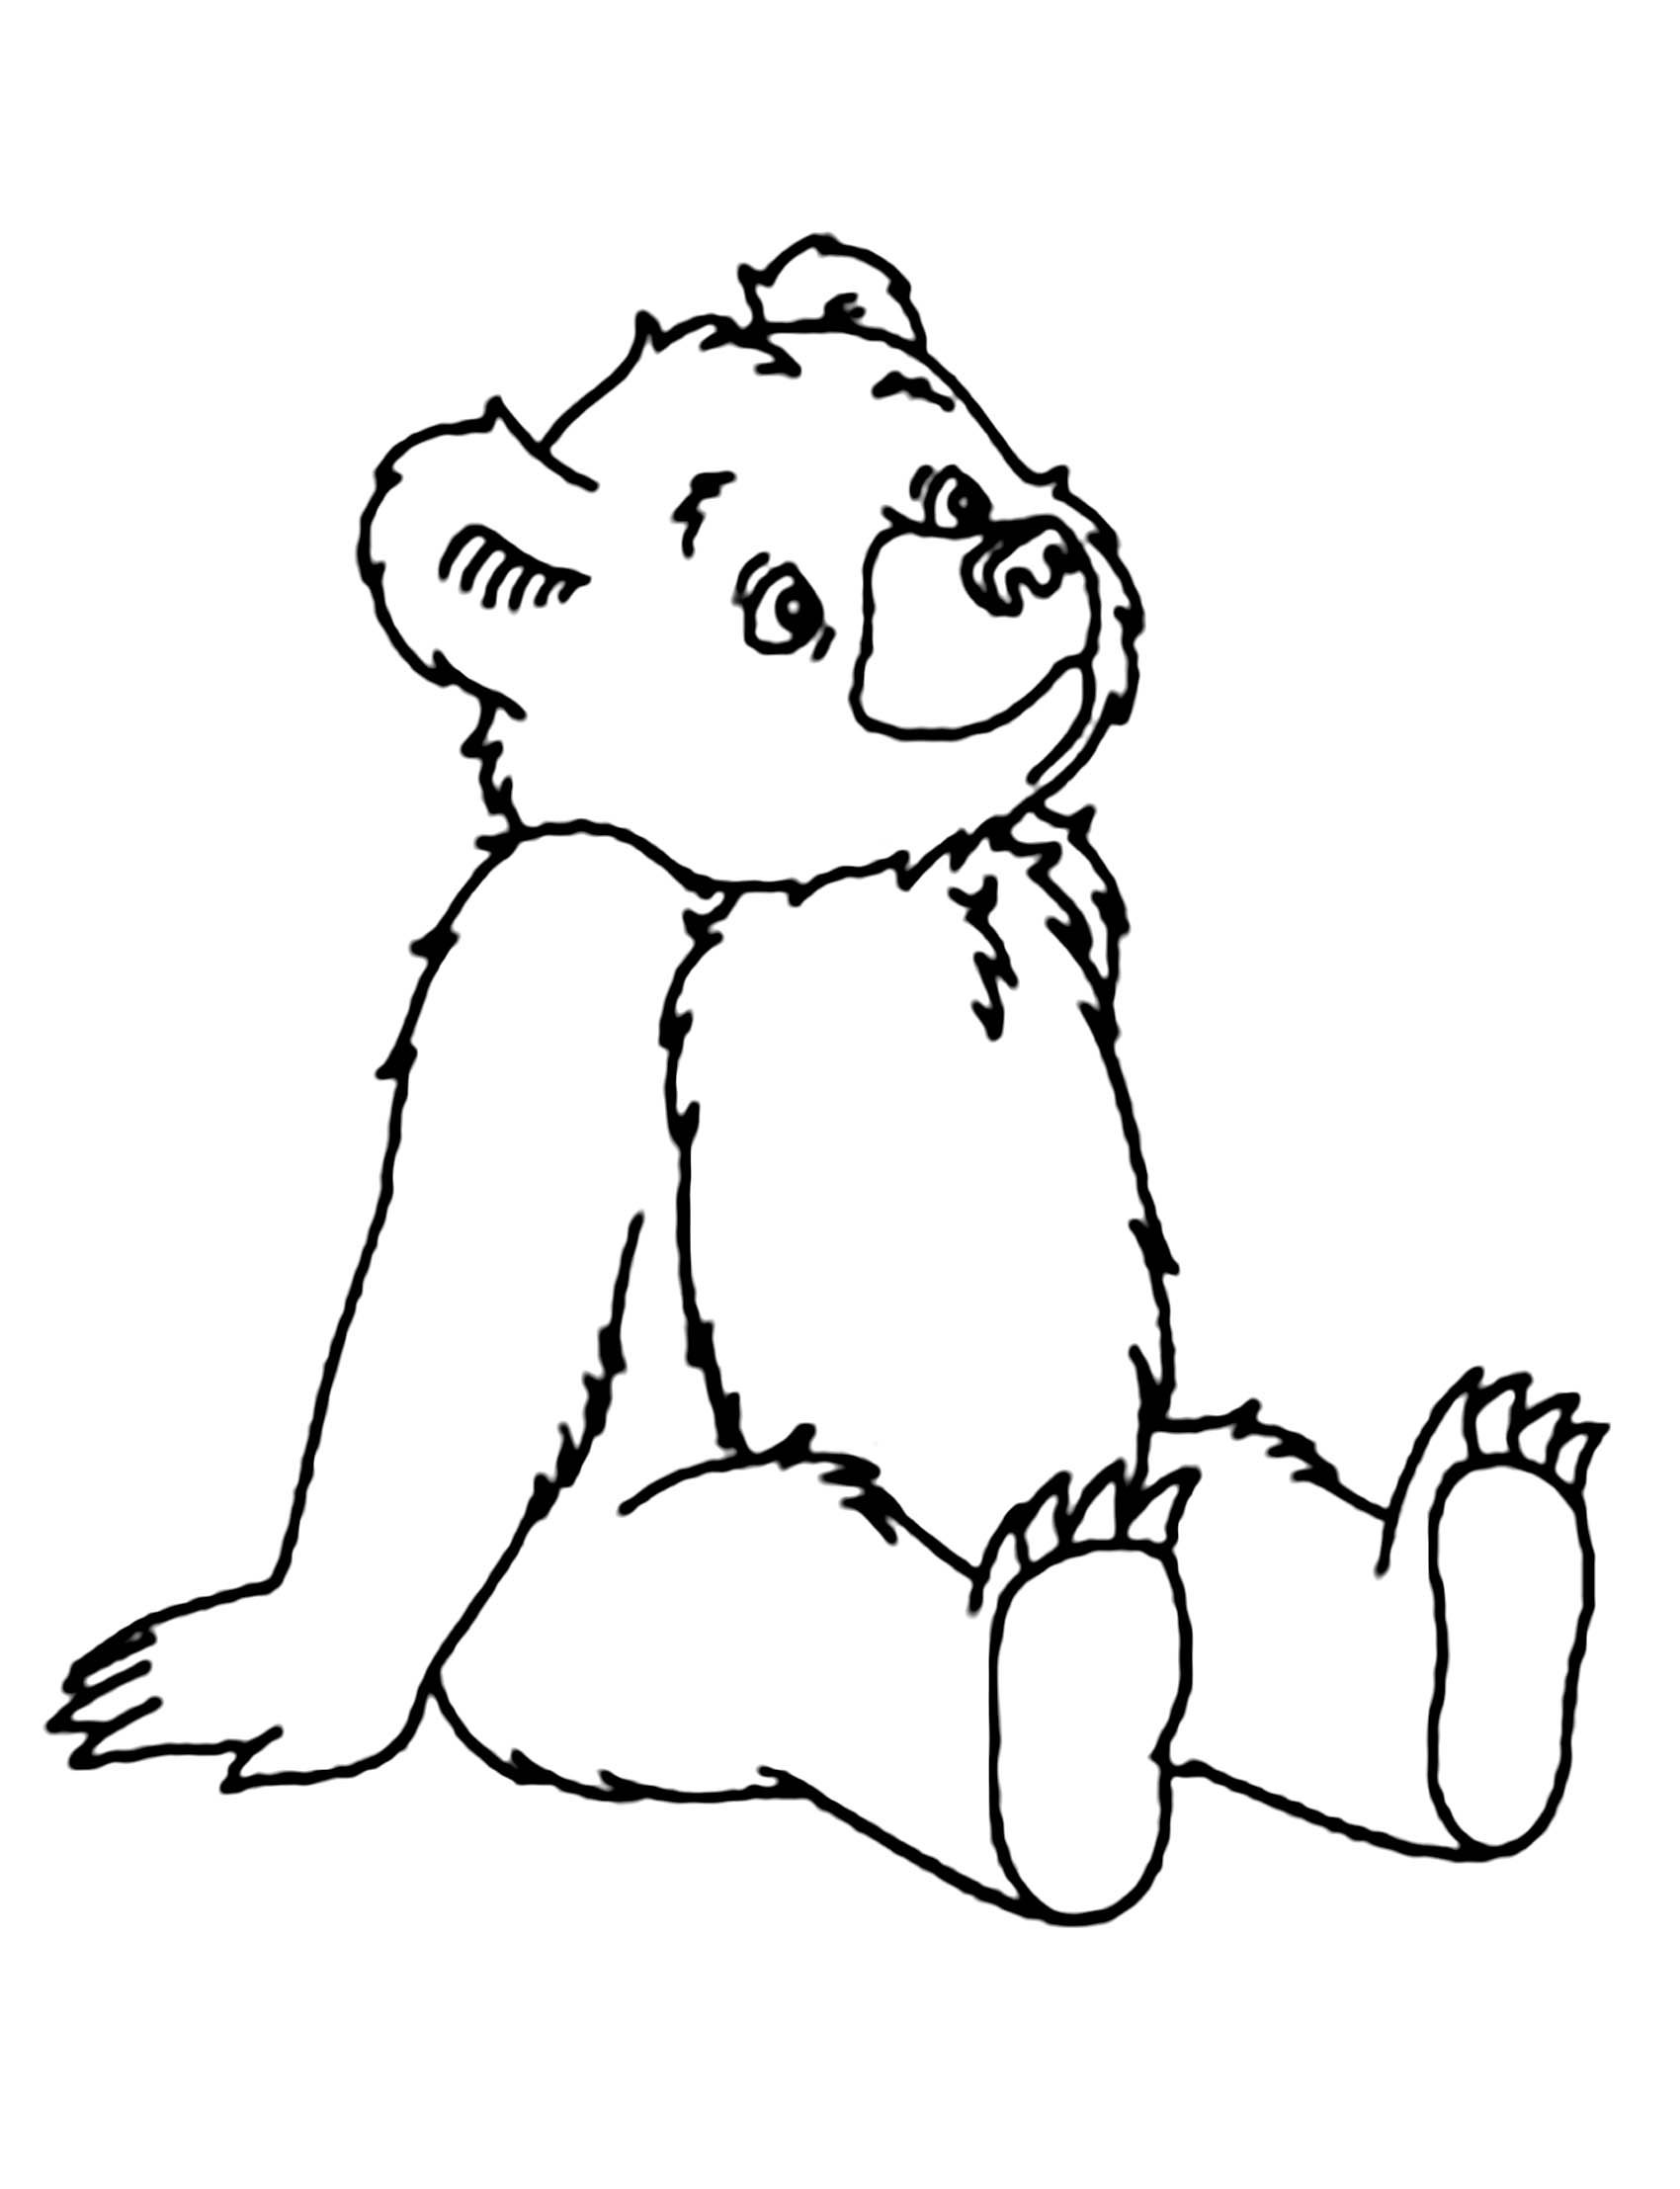 Bears Coloring Pages Bears To Download Bears Kids Coloring Pages